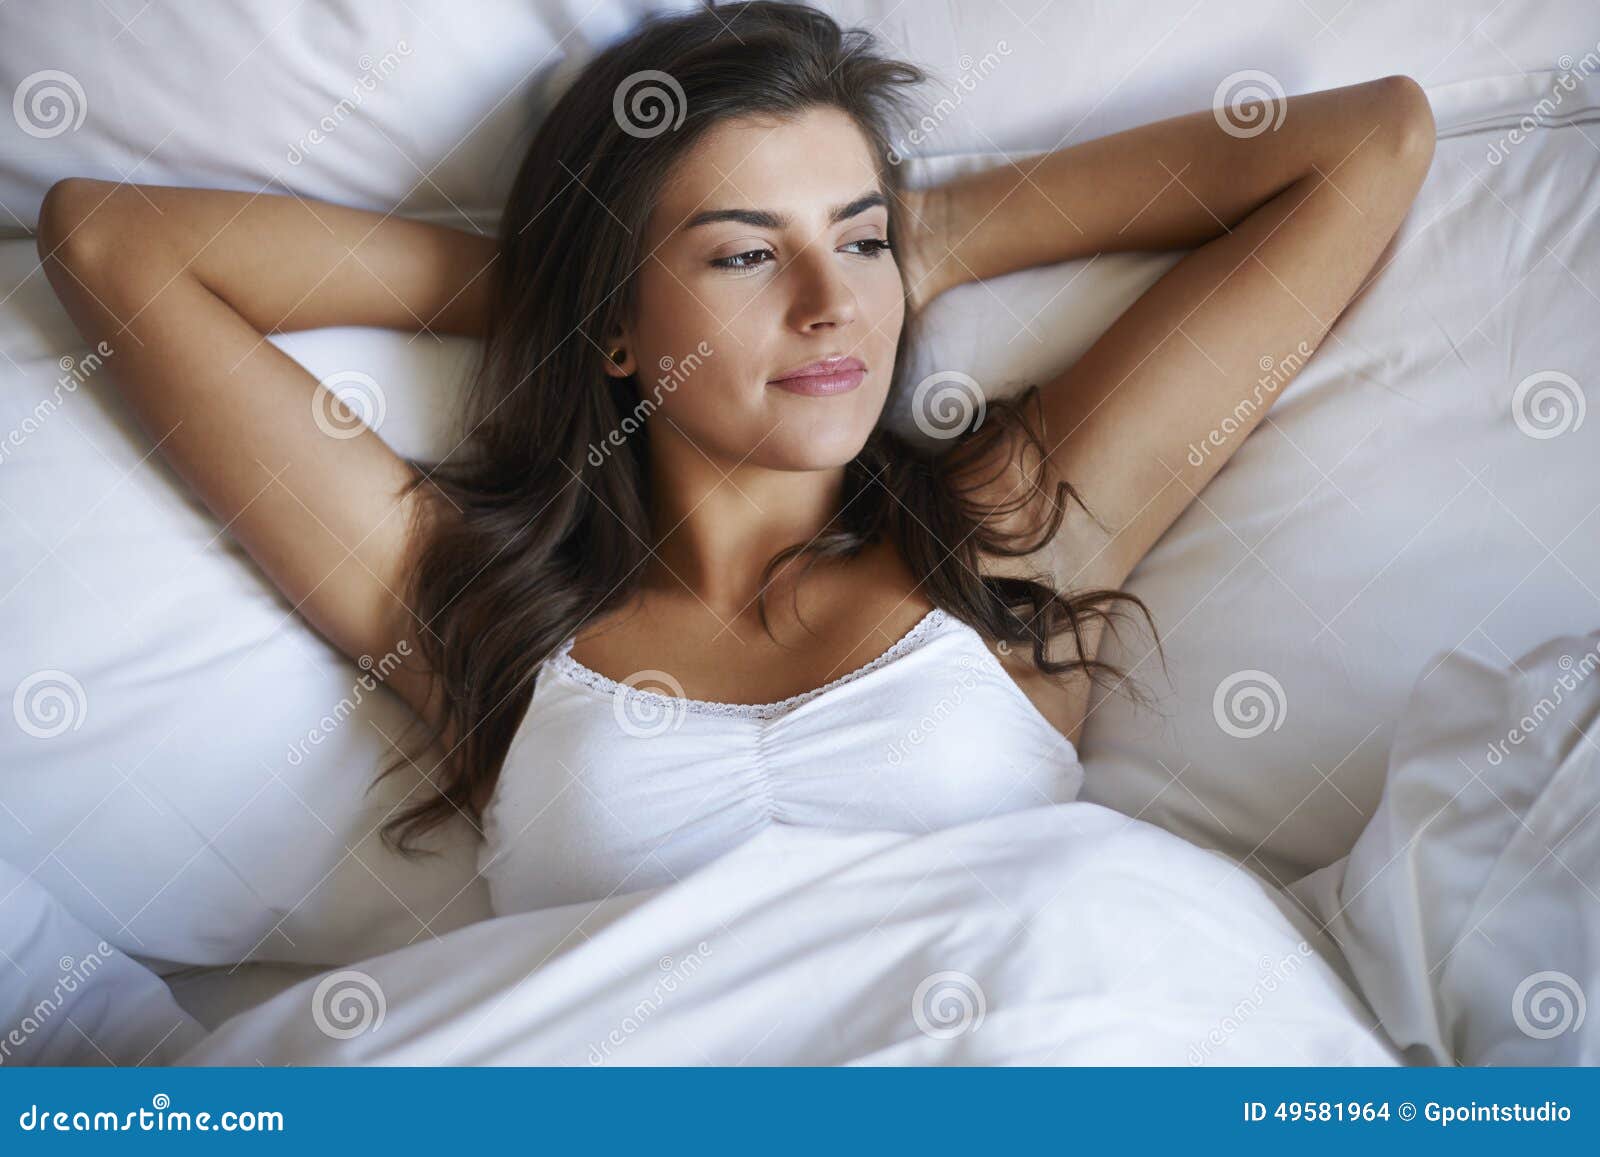 Beautiful woman in bed stock photo Image of dreams 